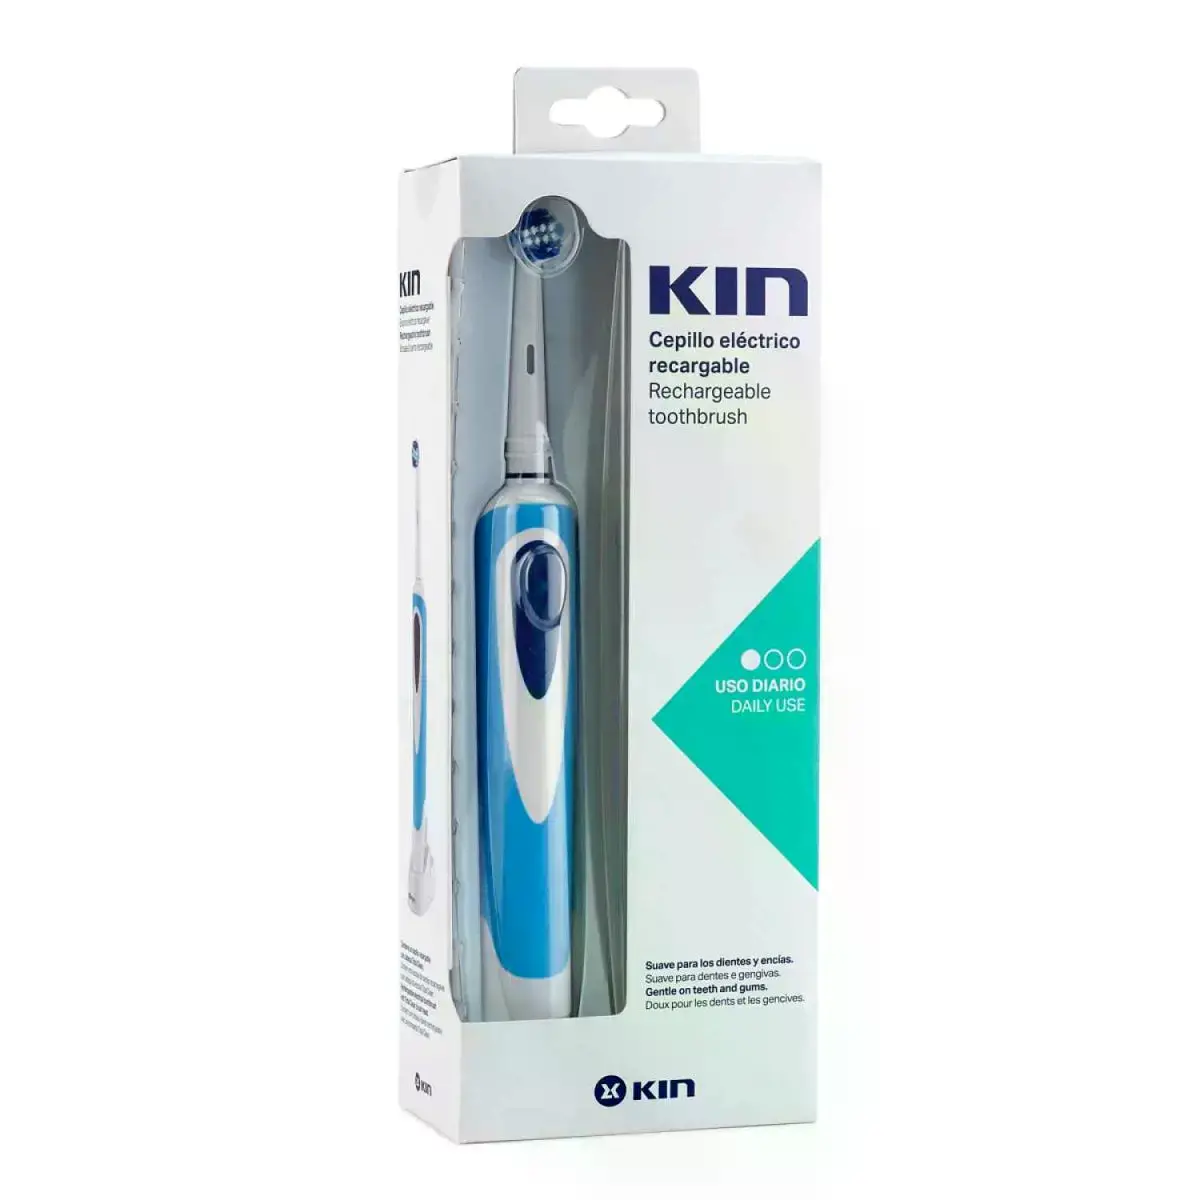 Kin rechargeable electric toothbrush